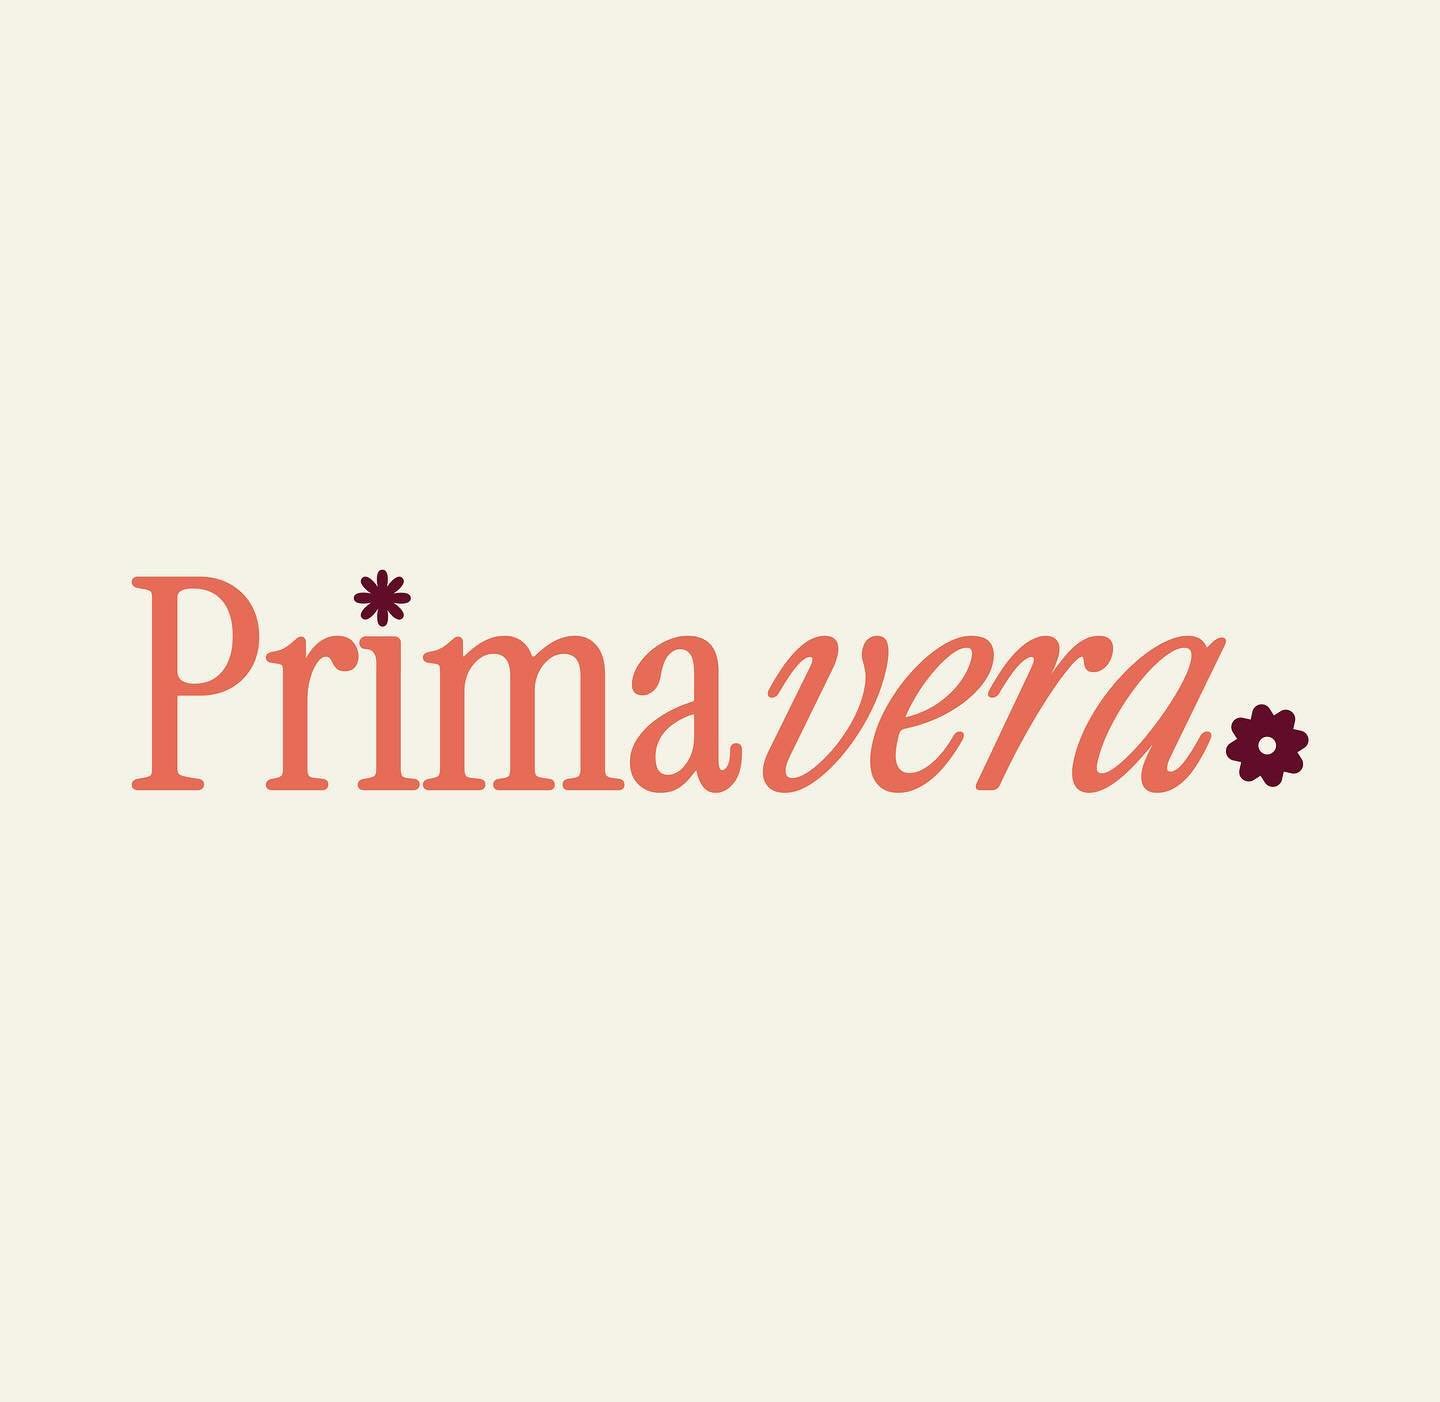 Logo design and brand board for Primavera🌸💗

This project is meant for a new development building located in my hometown, Medellin Colombia. However, I thought it&rsquo;d be sooo cool if it was for a florist shop or a clothing brand. Honestly, if s